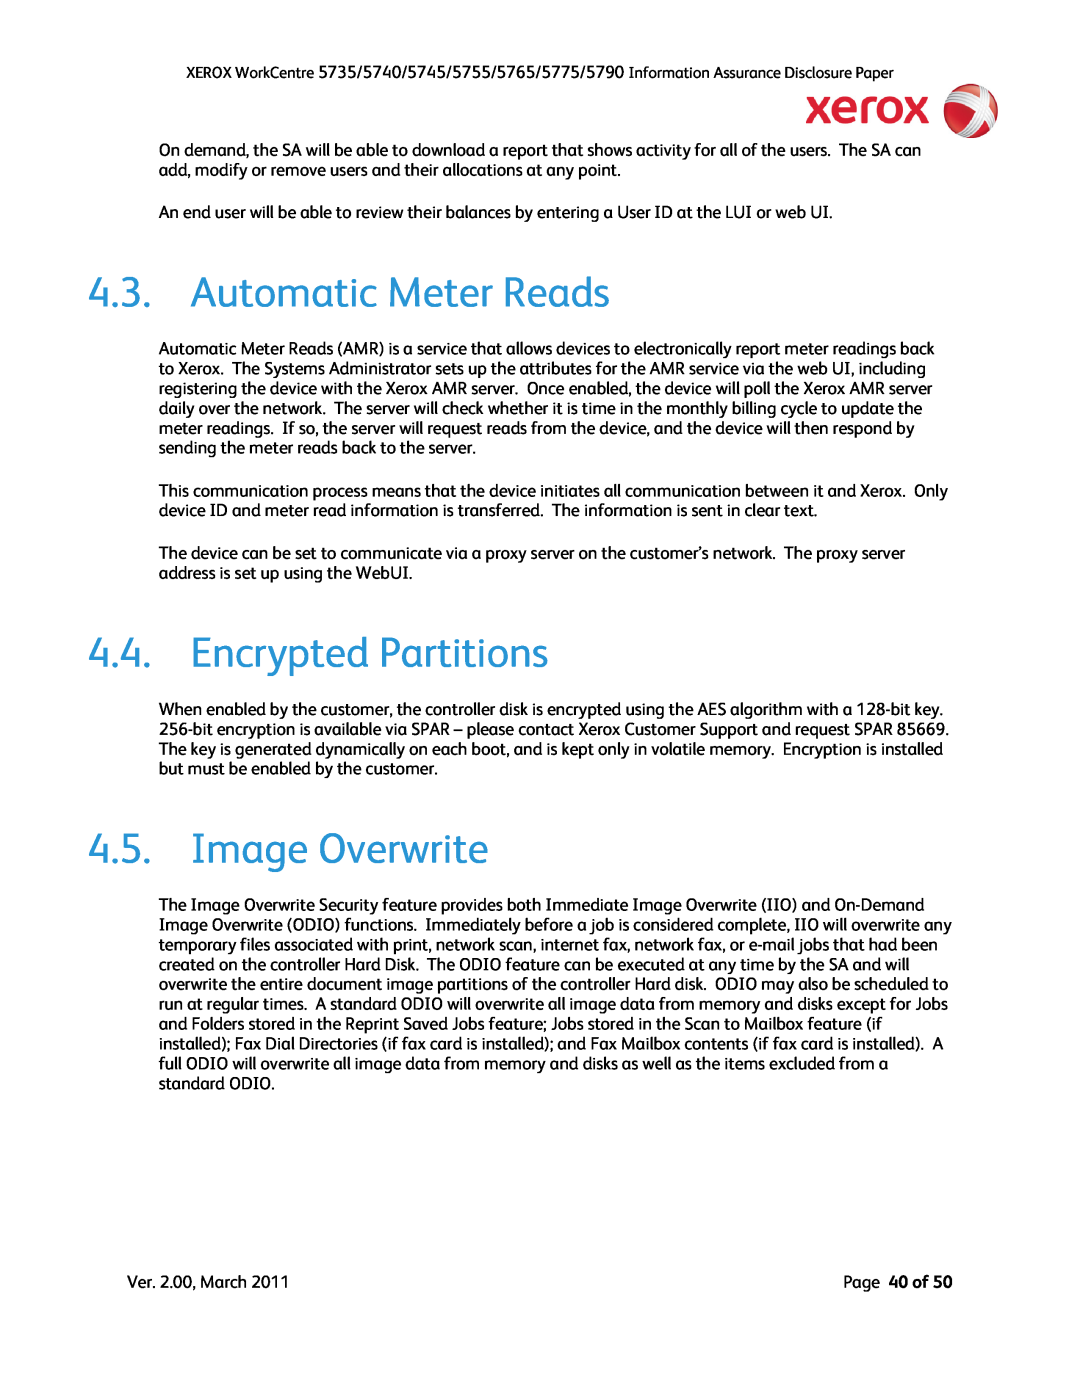 Xerox 5735, 5790, 5775, 5745, 5740, 5755 manual Automatic Meter Reads, Encrypted Partitions, Image Overwrite, Page 40 of 